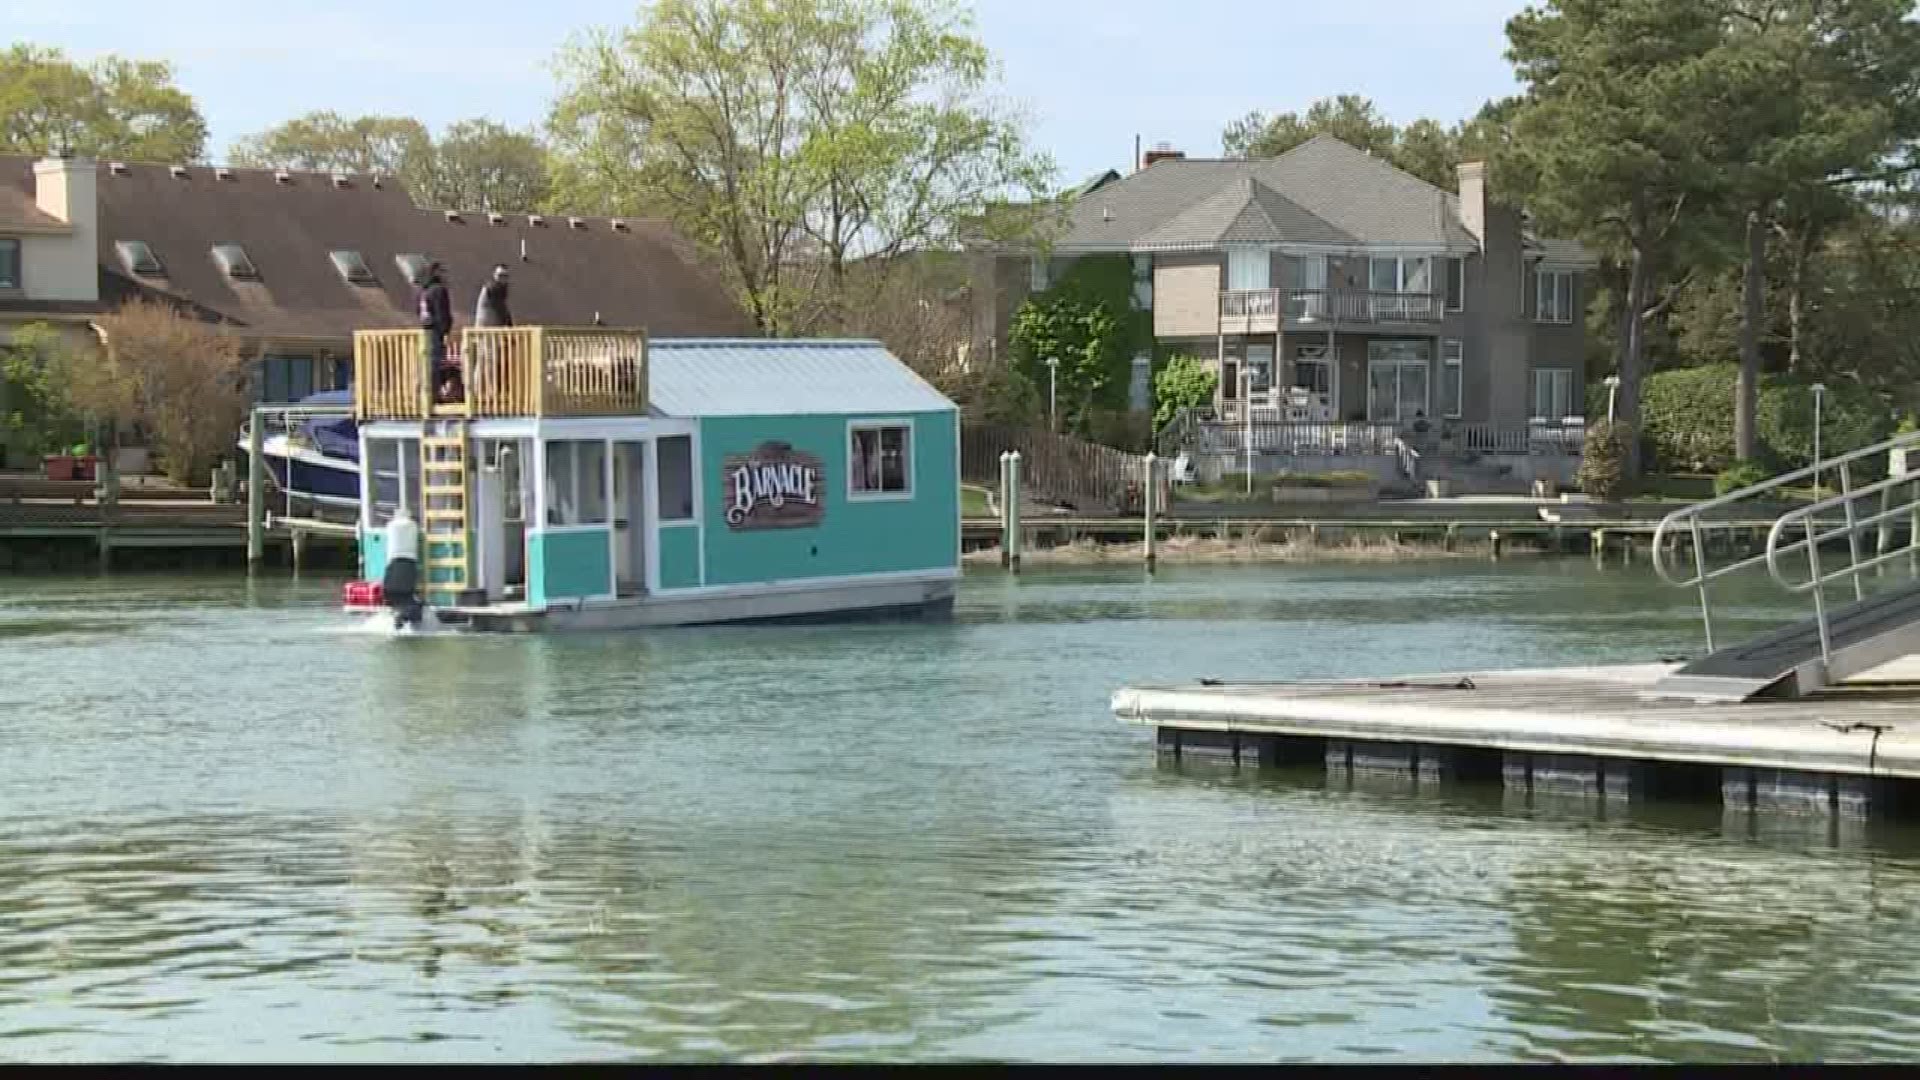 It looks like a party boat, but in reality, it's more like a floating food truck.